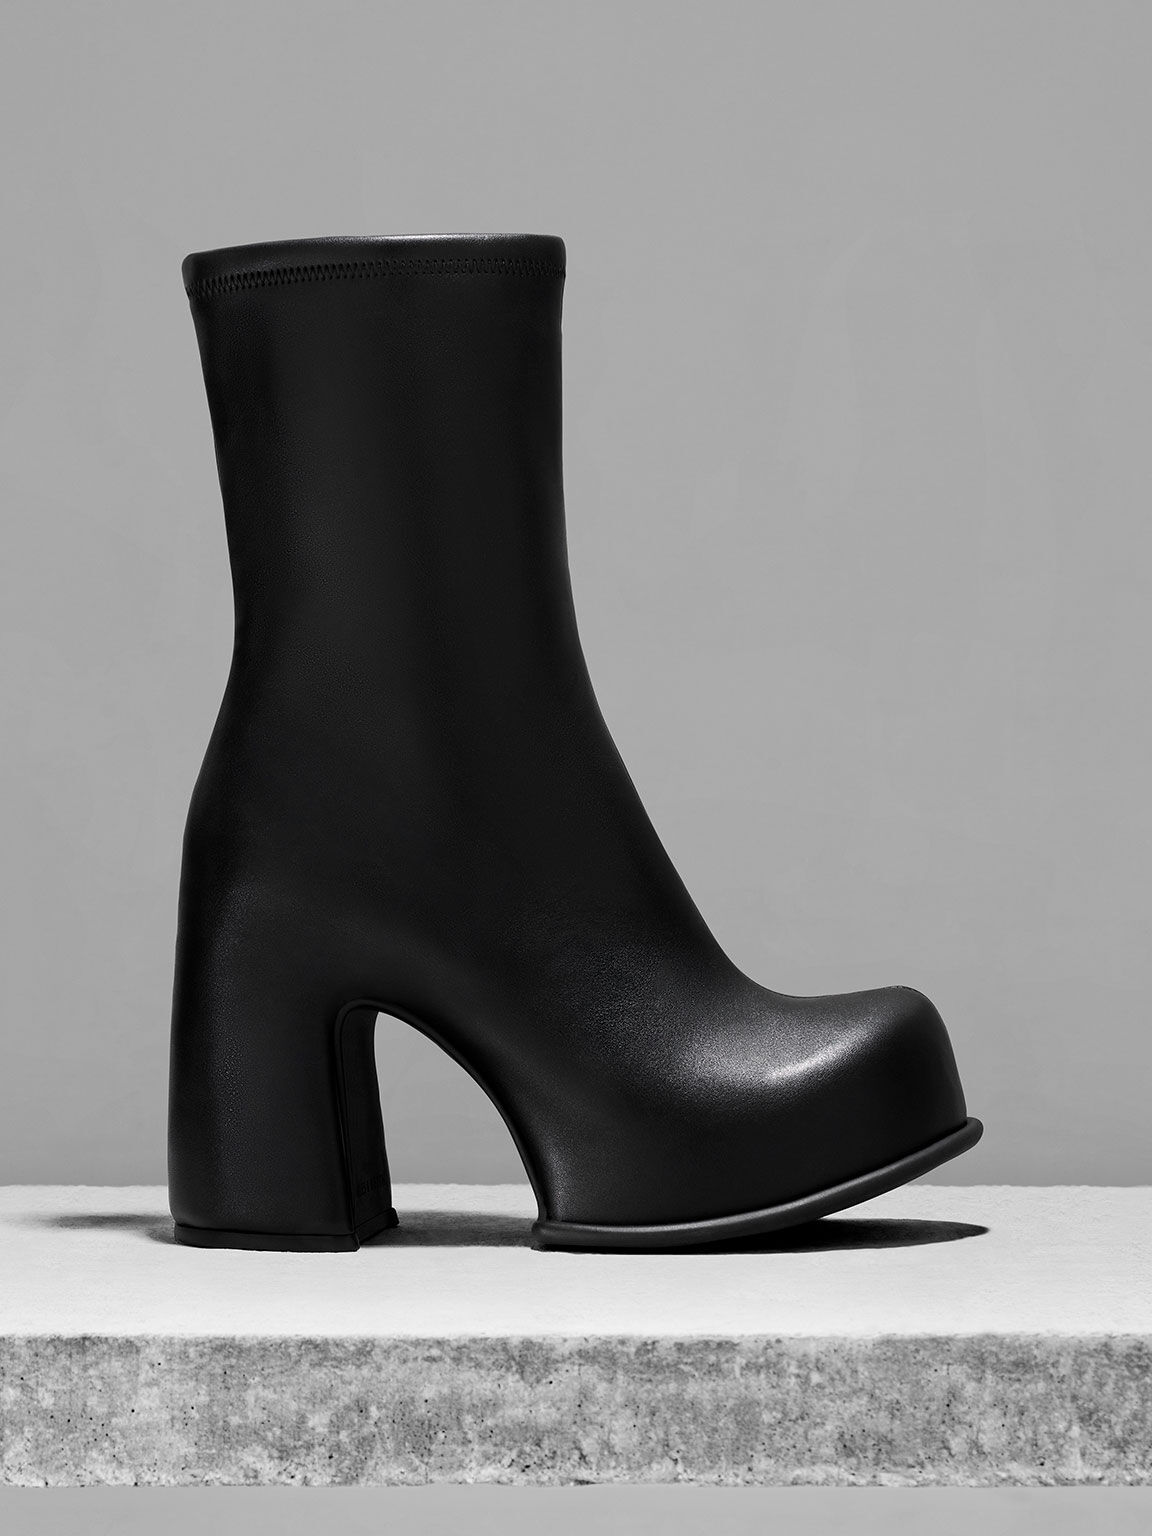 Black Pixie Platform Ankle Boots - CHARLES & KEITH US